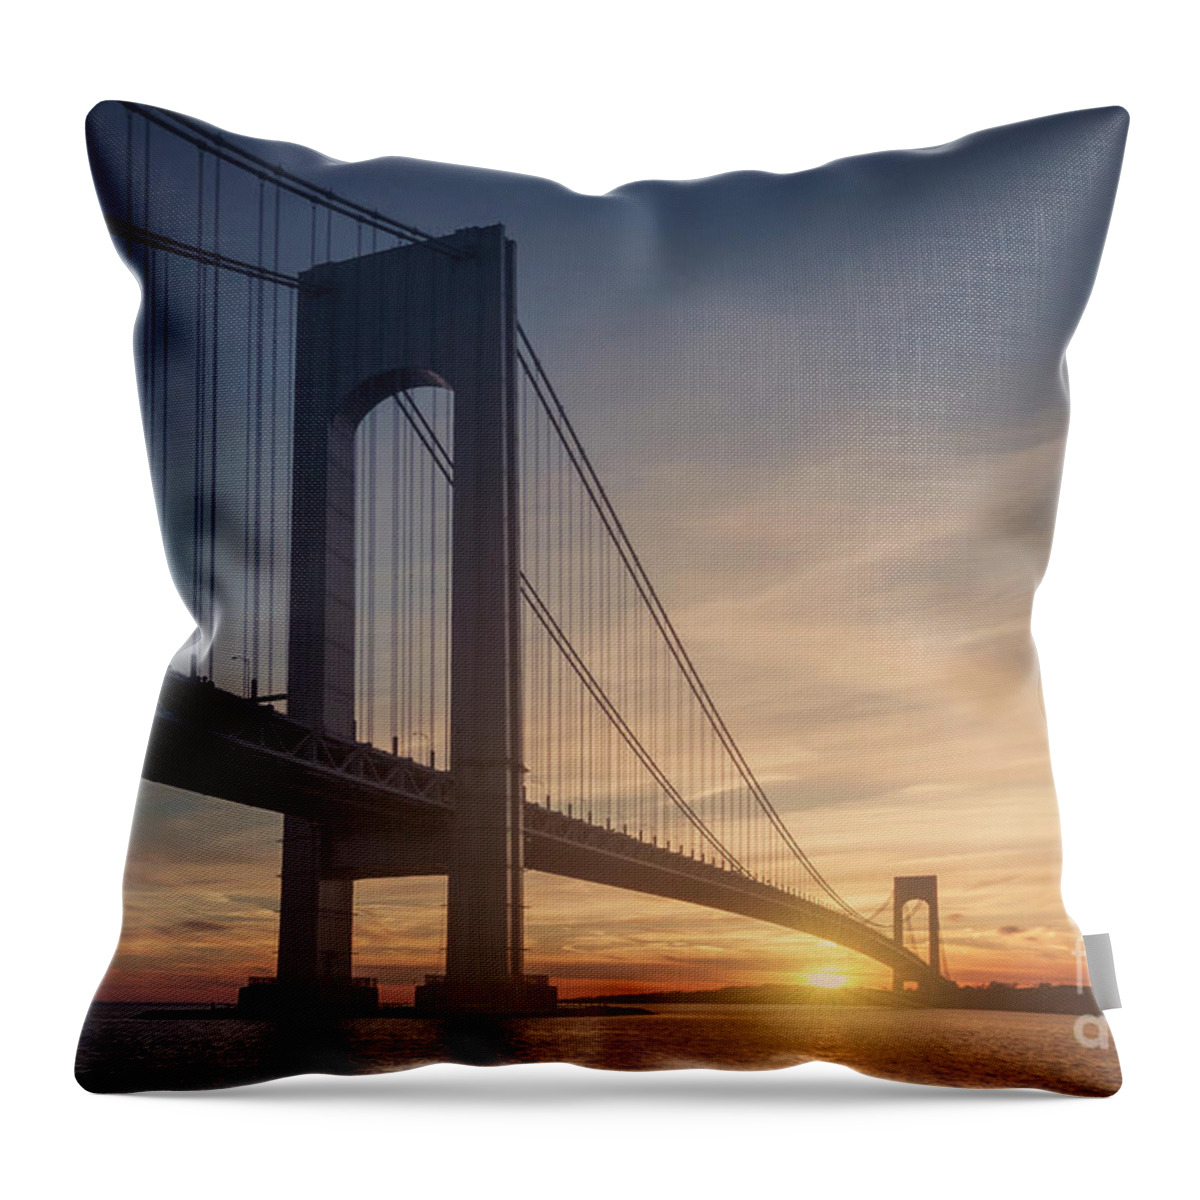 Kremsdorf Throw Pillow featuring the photograph Hold Back The Night by Evelina Kremsdorf